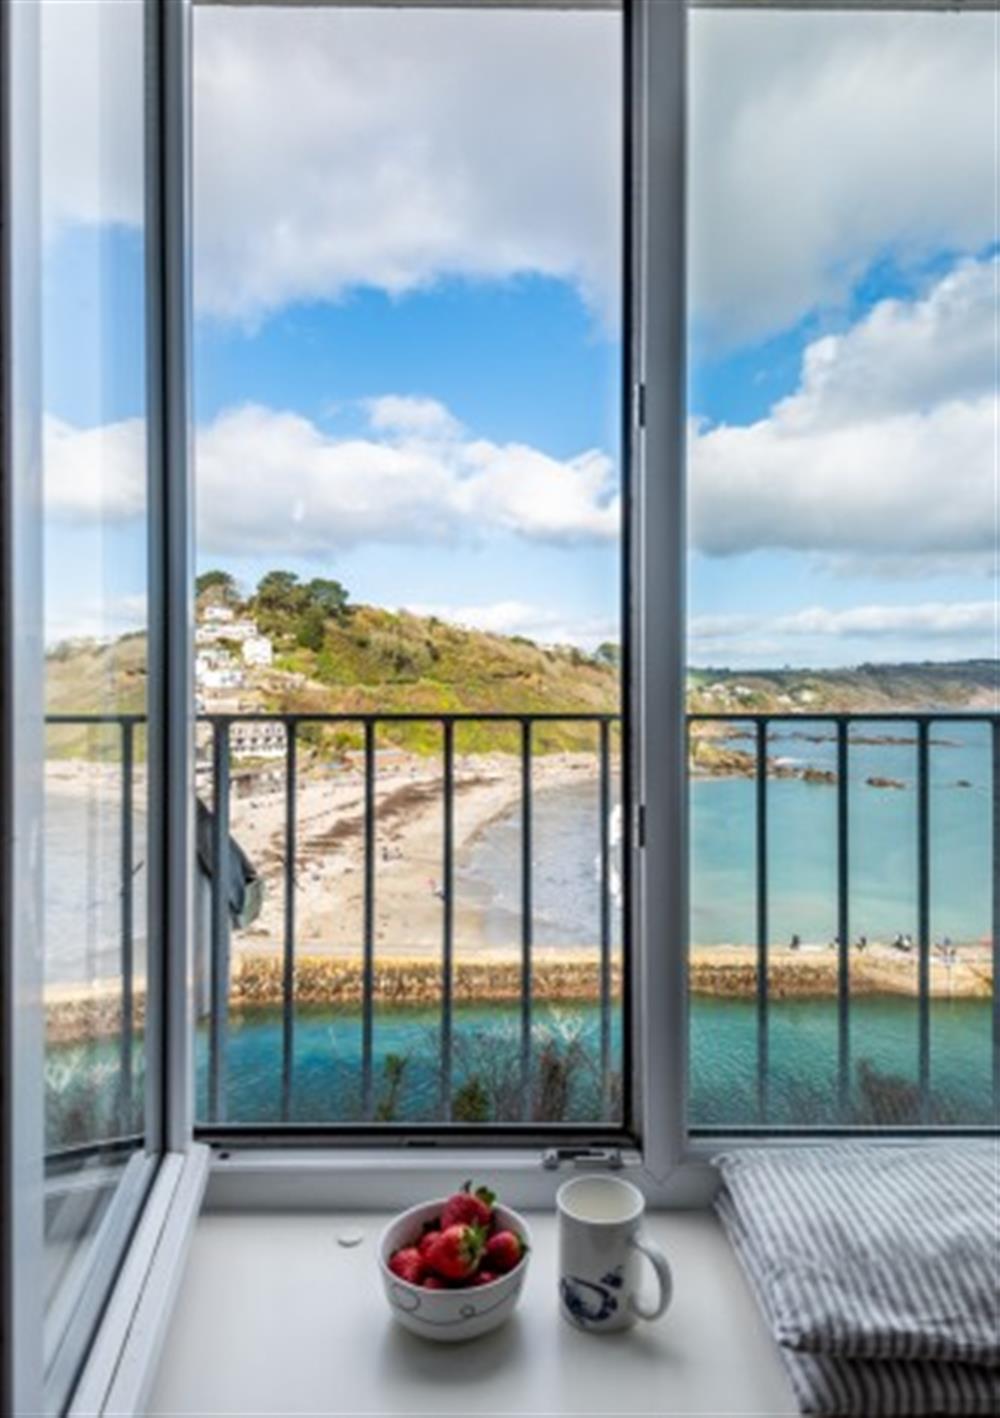 Stunning views in all weathers at 5 Westcliff Apartment in Looe